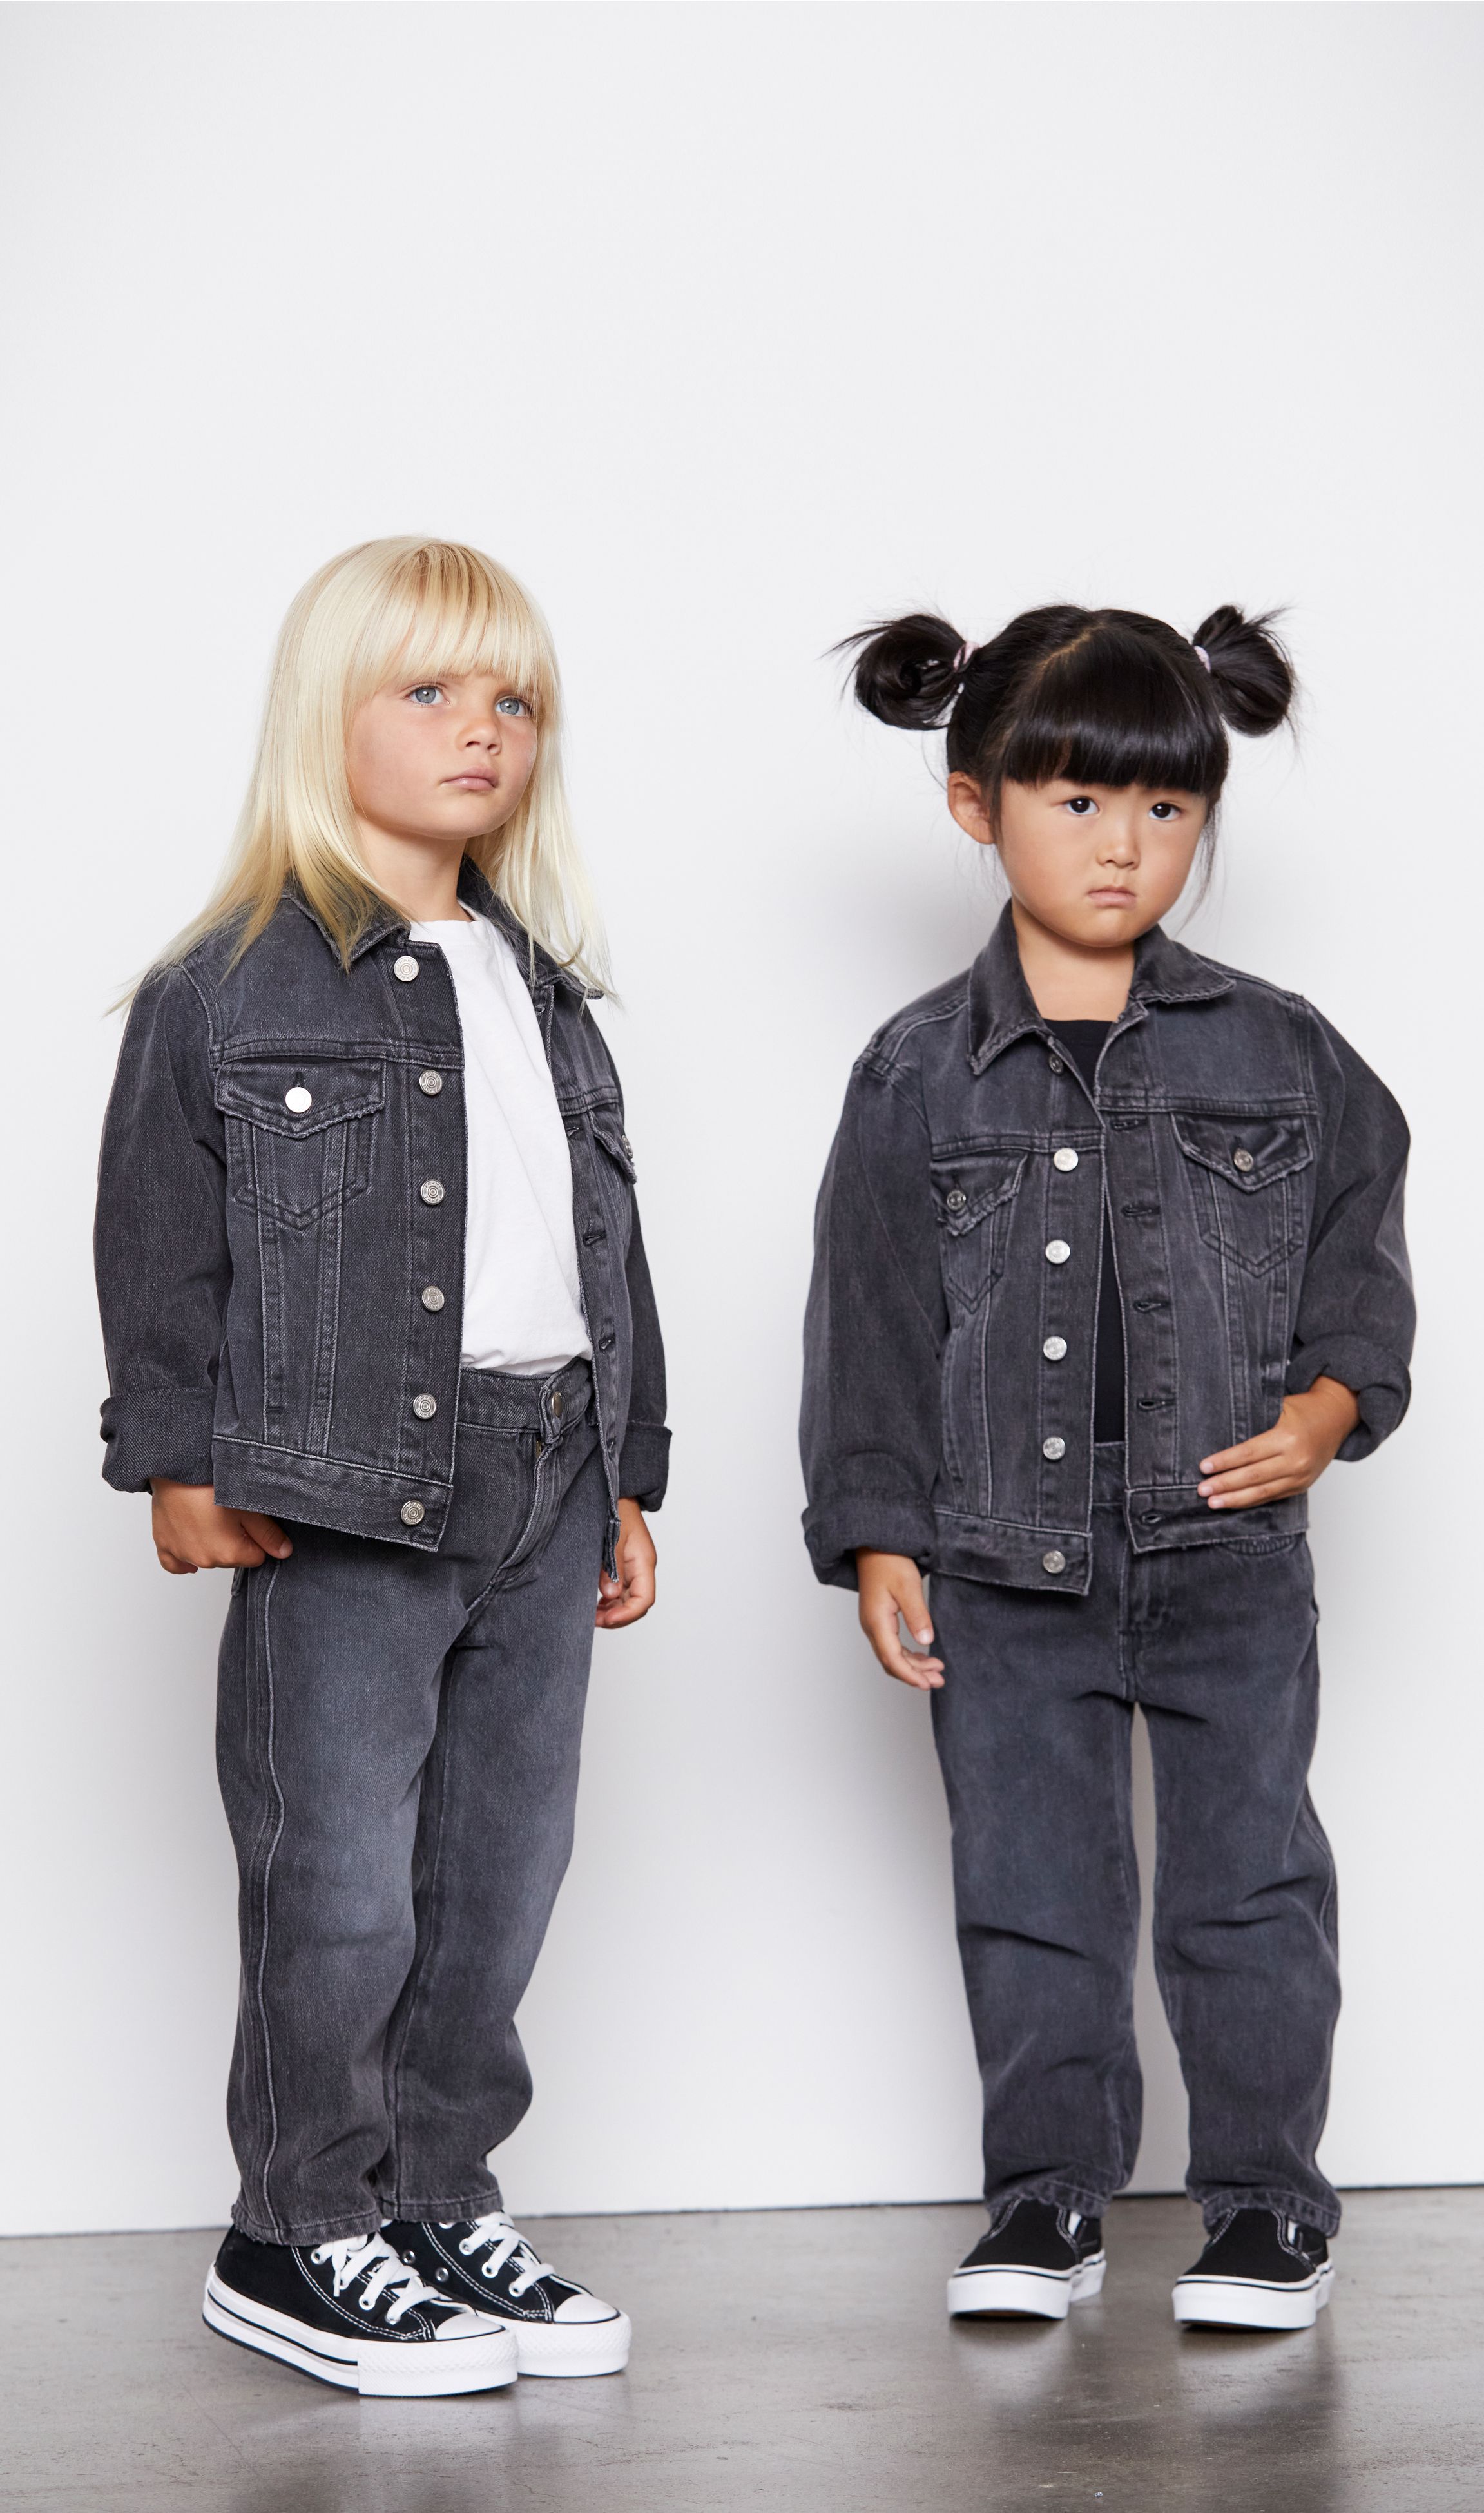 Dedicated toddlers of fashion: how kidswear became so minimal